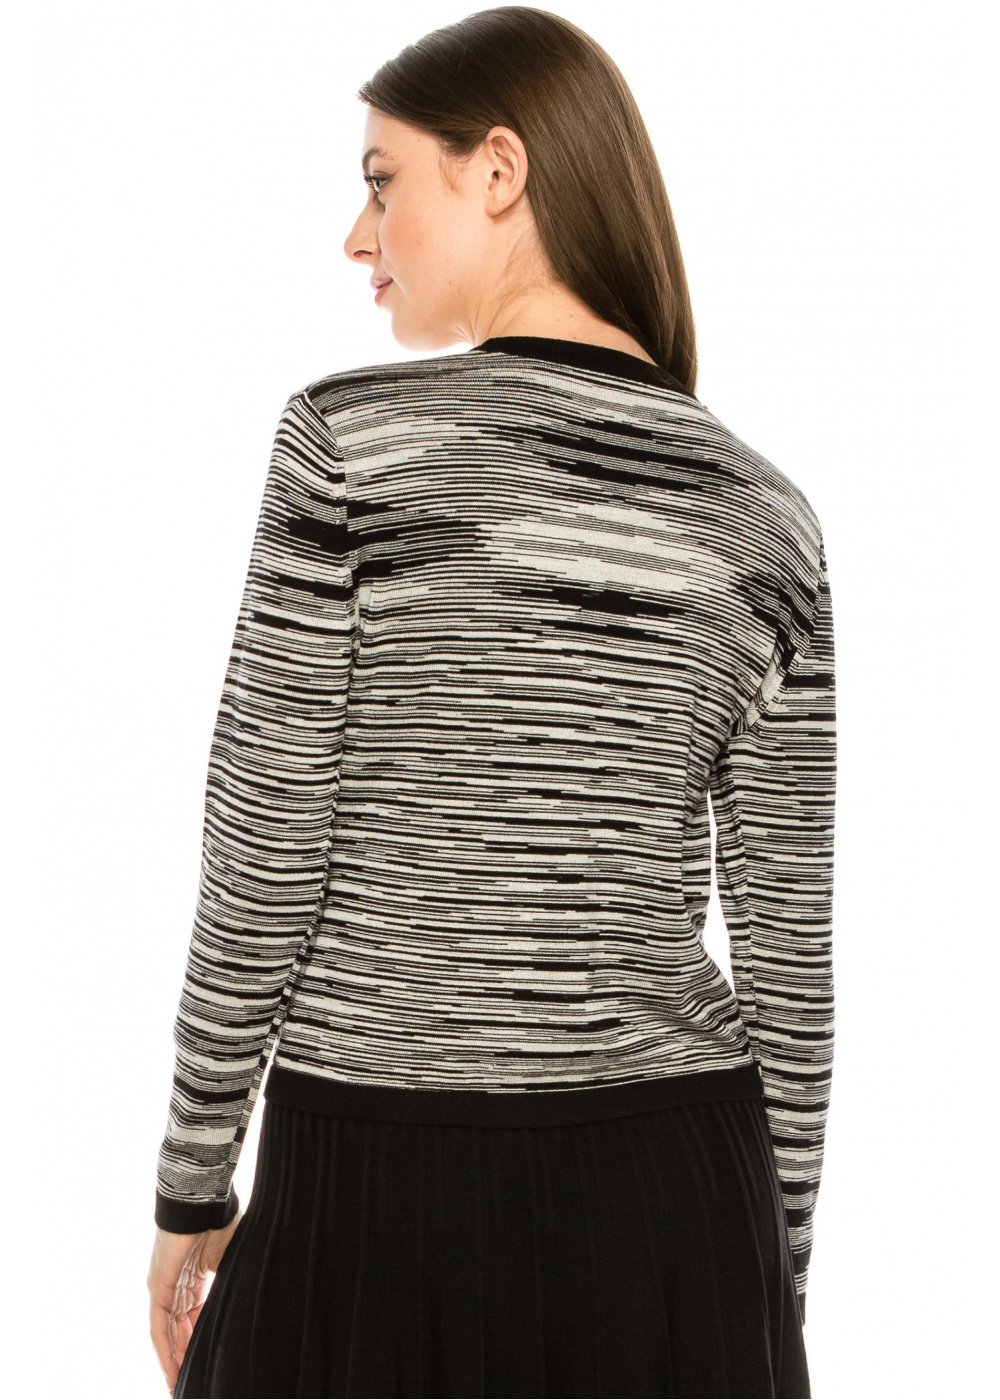 Black and White Abstract Line Sweater